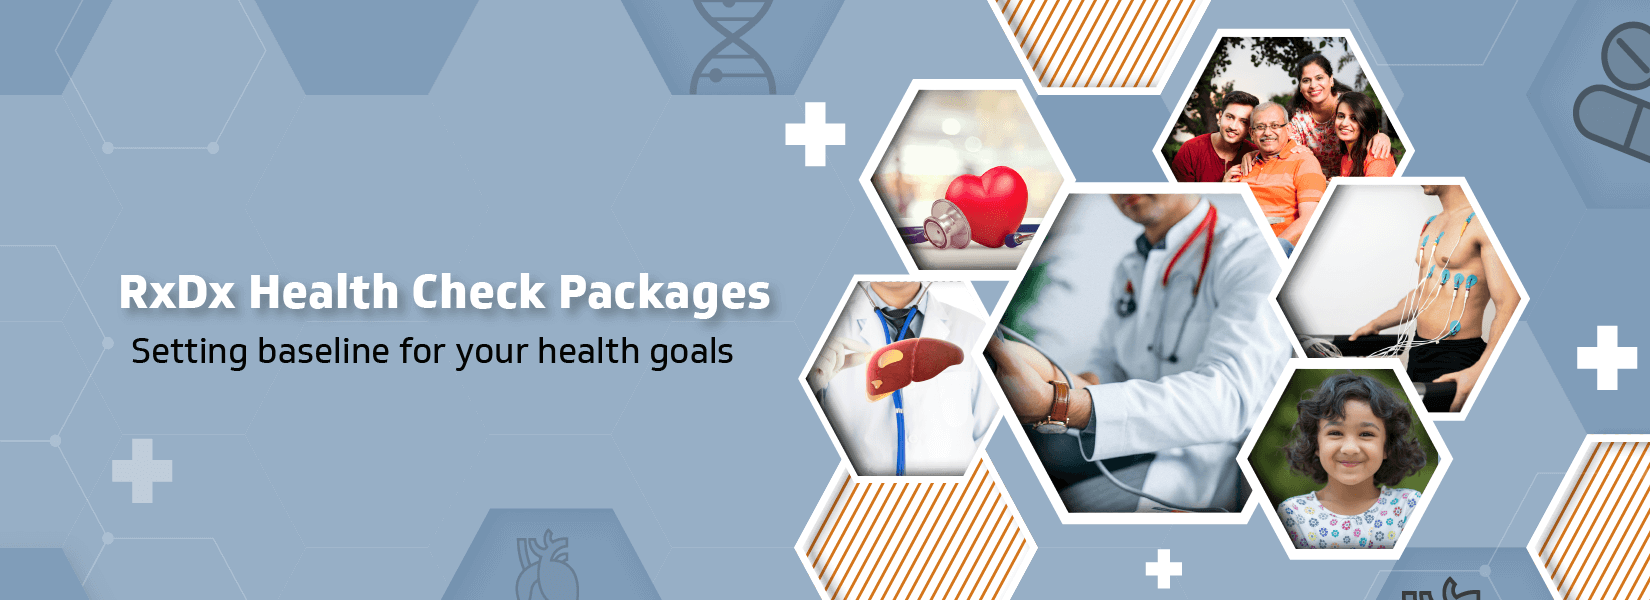 Health Check Packages image